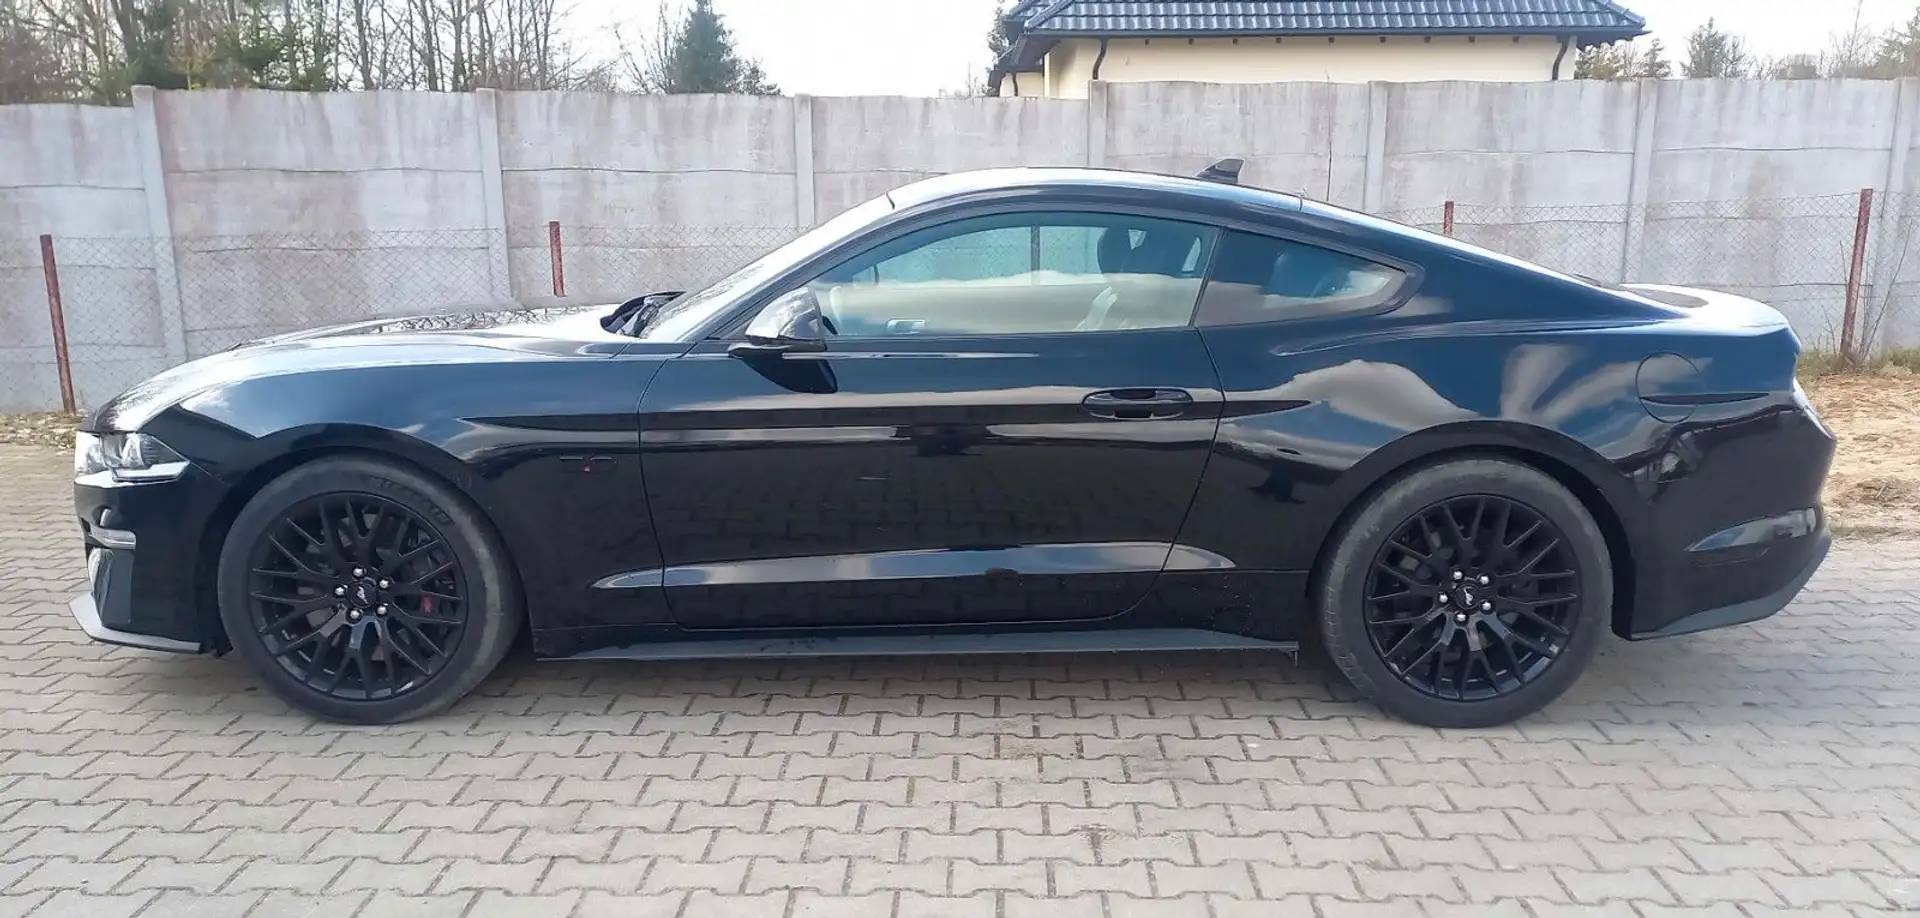 Ford Mustang GT 5.0 Ti-VCT V8 Deutsches Modell Black - 2